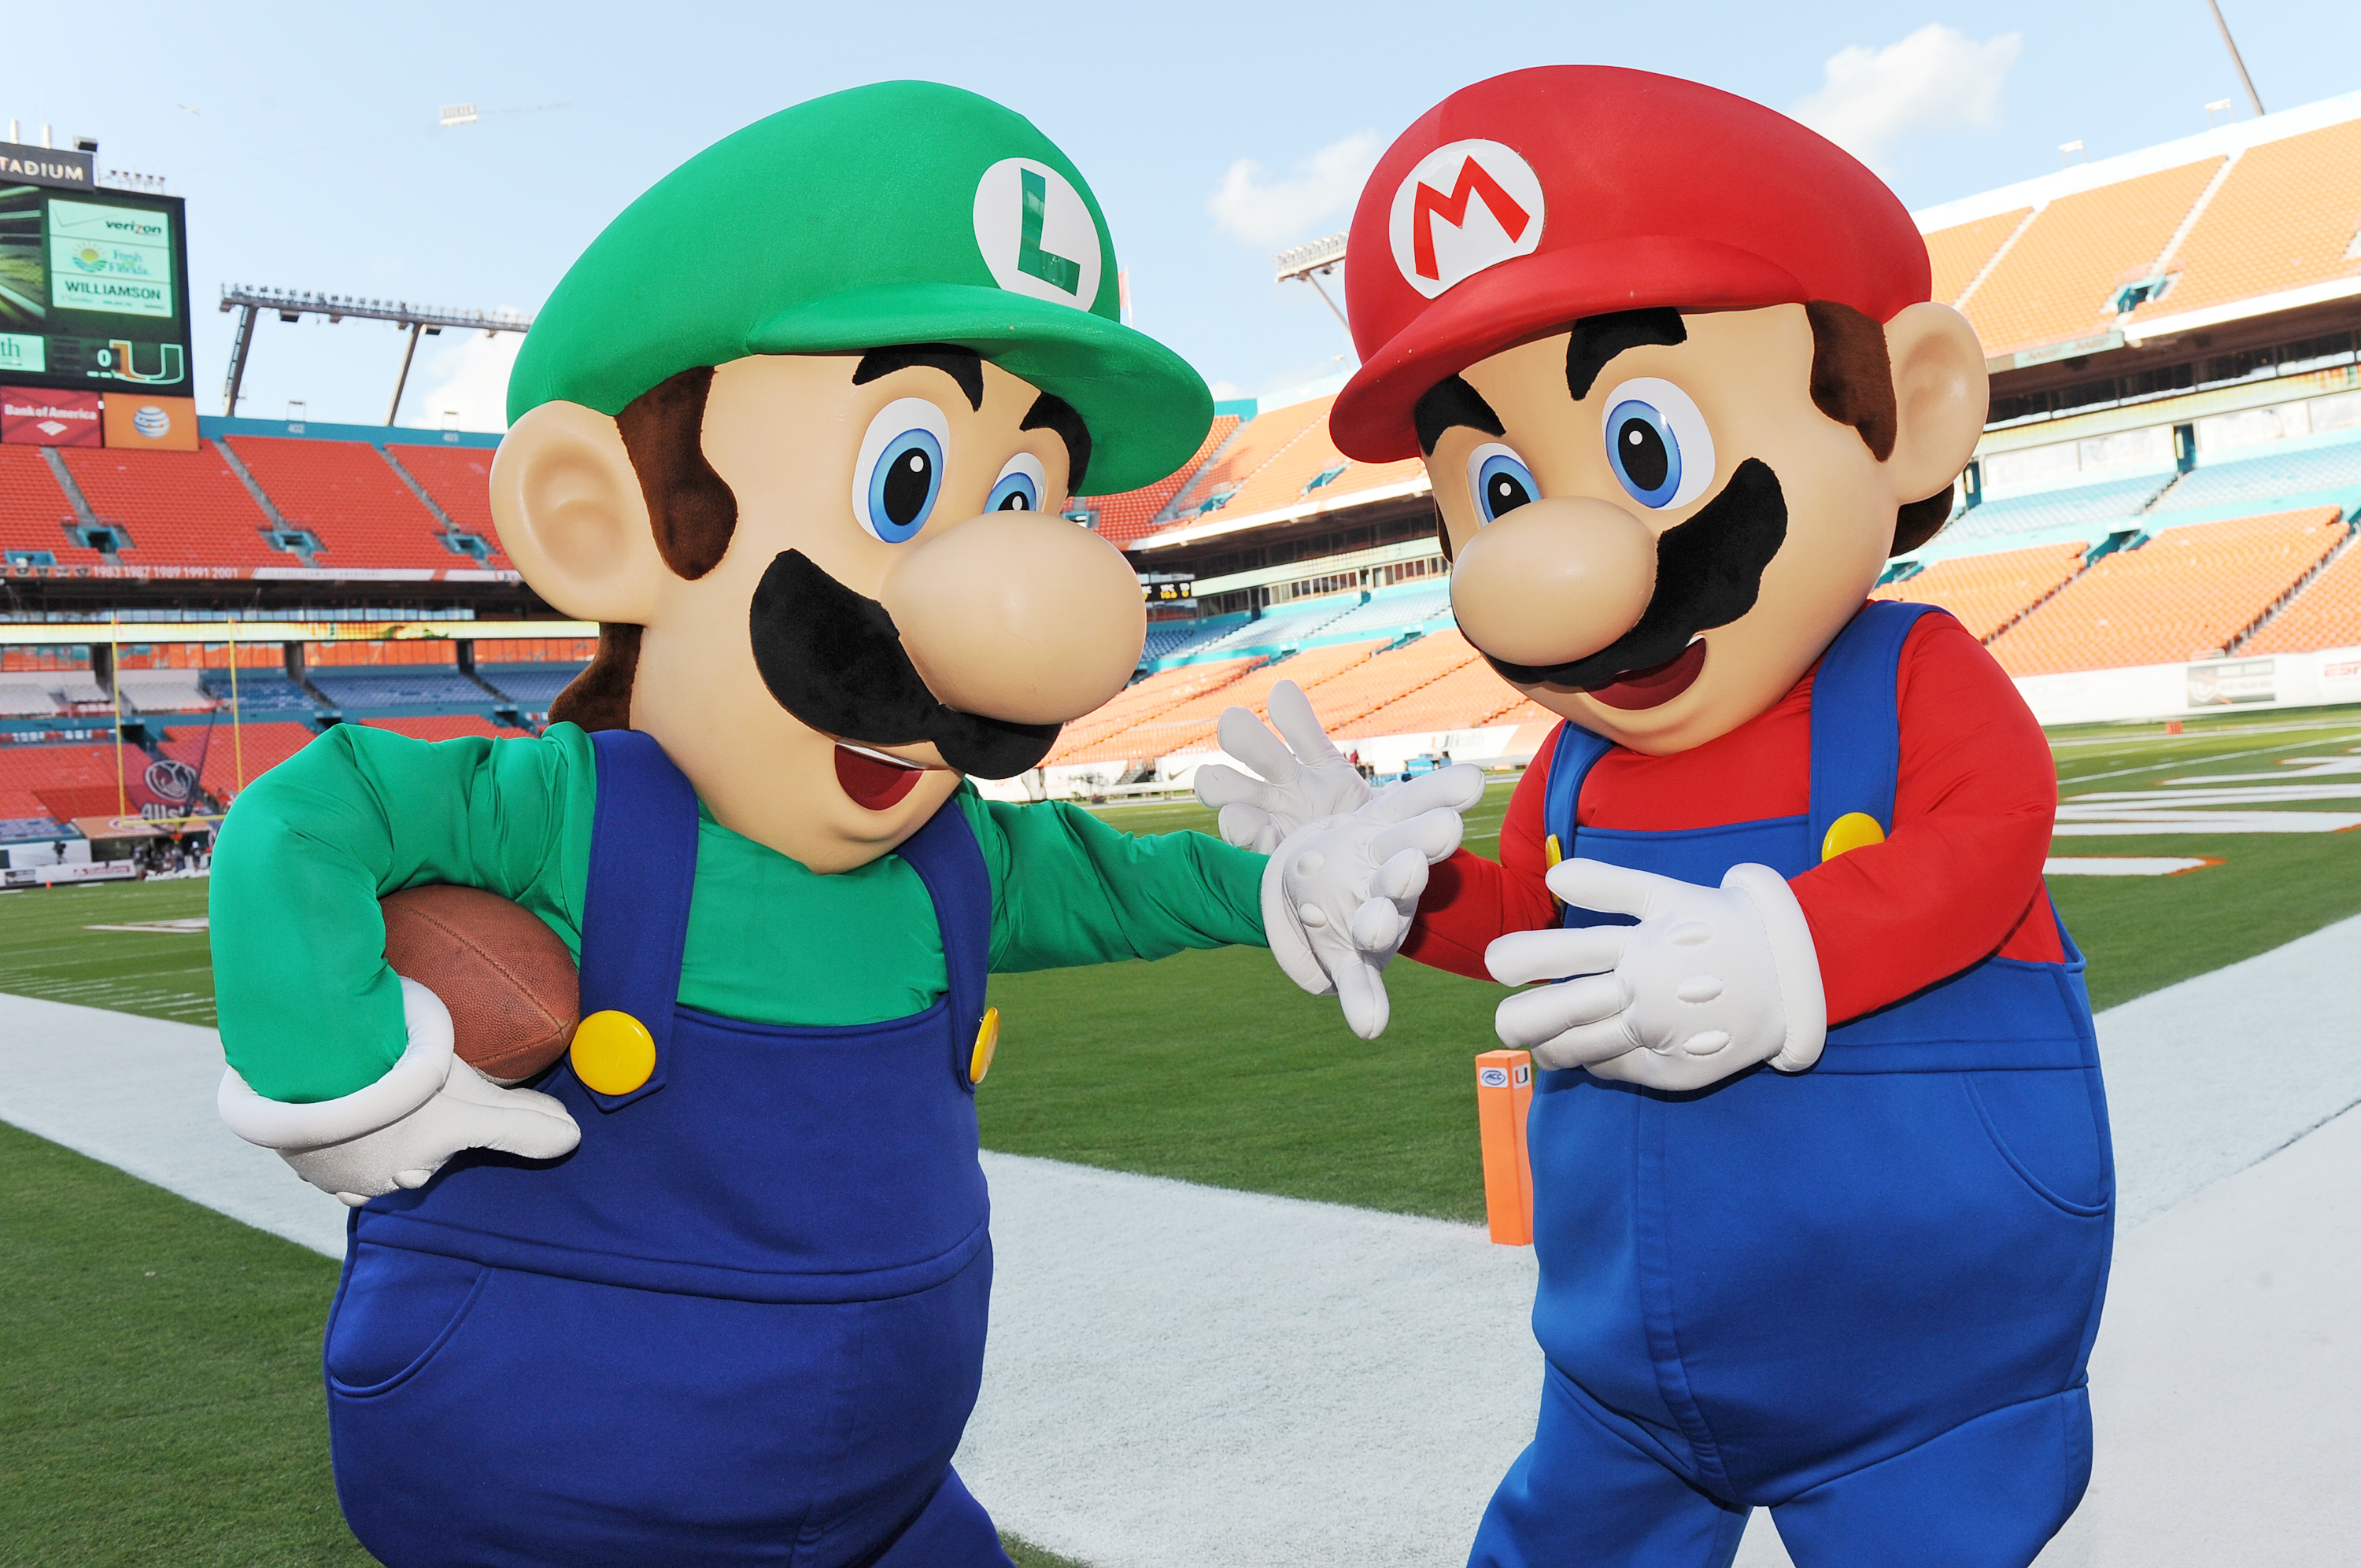 Mario and Luigi take the field at Sun Life Stadium before the face-off between Florida State and University of Miami on Nov. 15, 2014 (Jeff Daly—Invision for Nintendo)